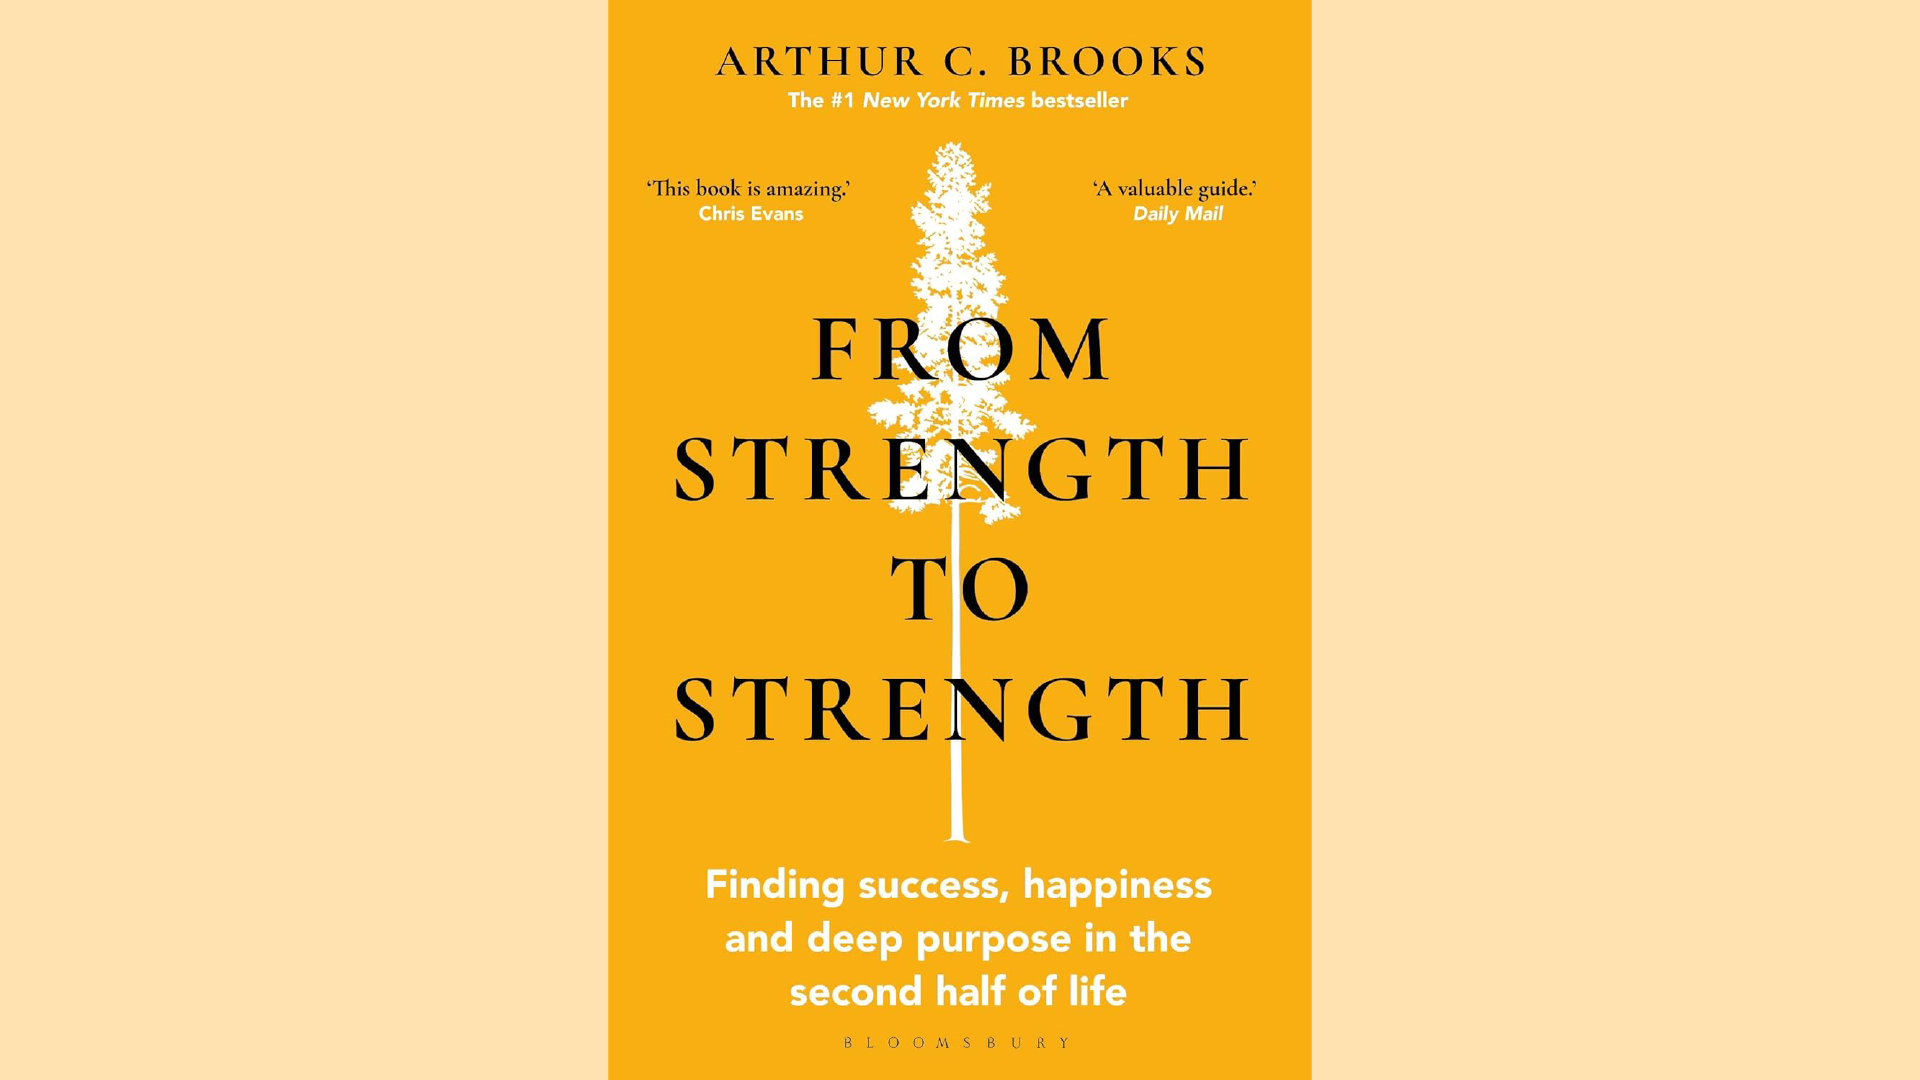 Summary: From Strength to Strength by Arthur Brooks